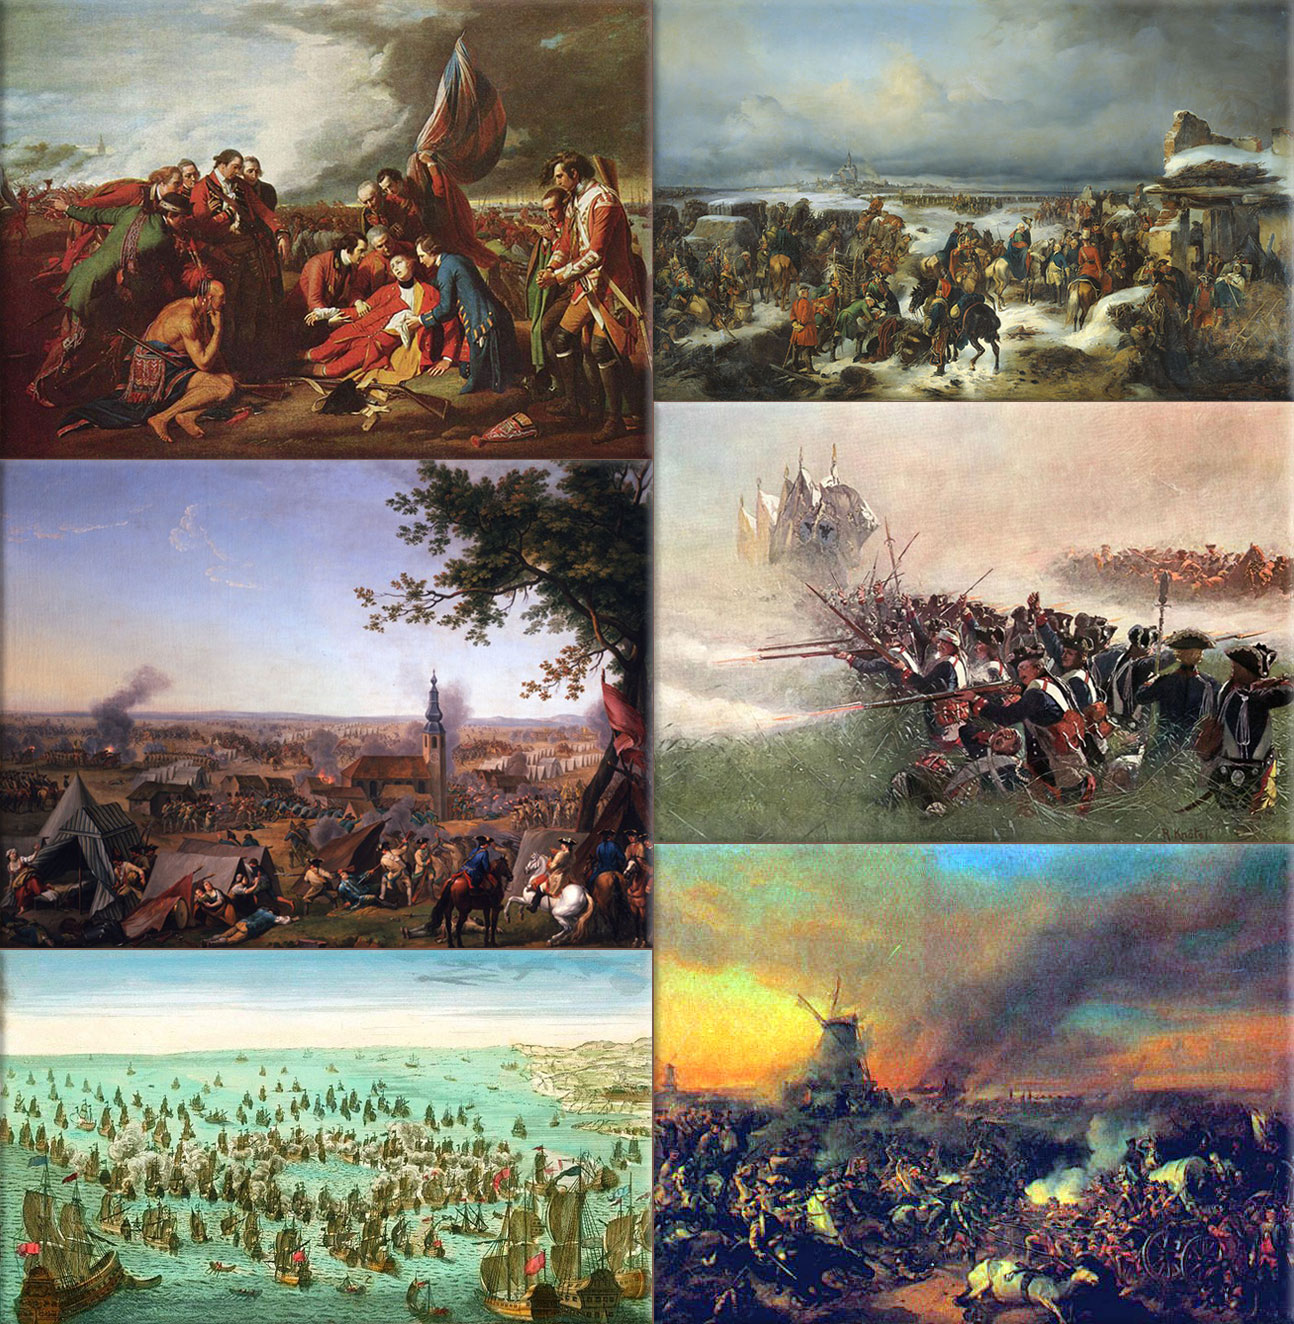 Seven Years' War: was a world war that took place between 1756 and 1763. It involved most of the great powers of the time and affected Europe, North America, Central America, the West African coast, India, and the Philippines.